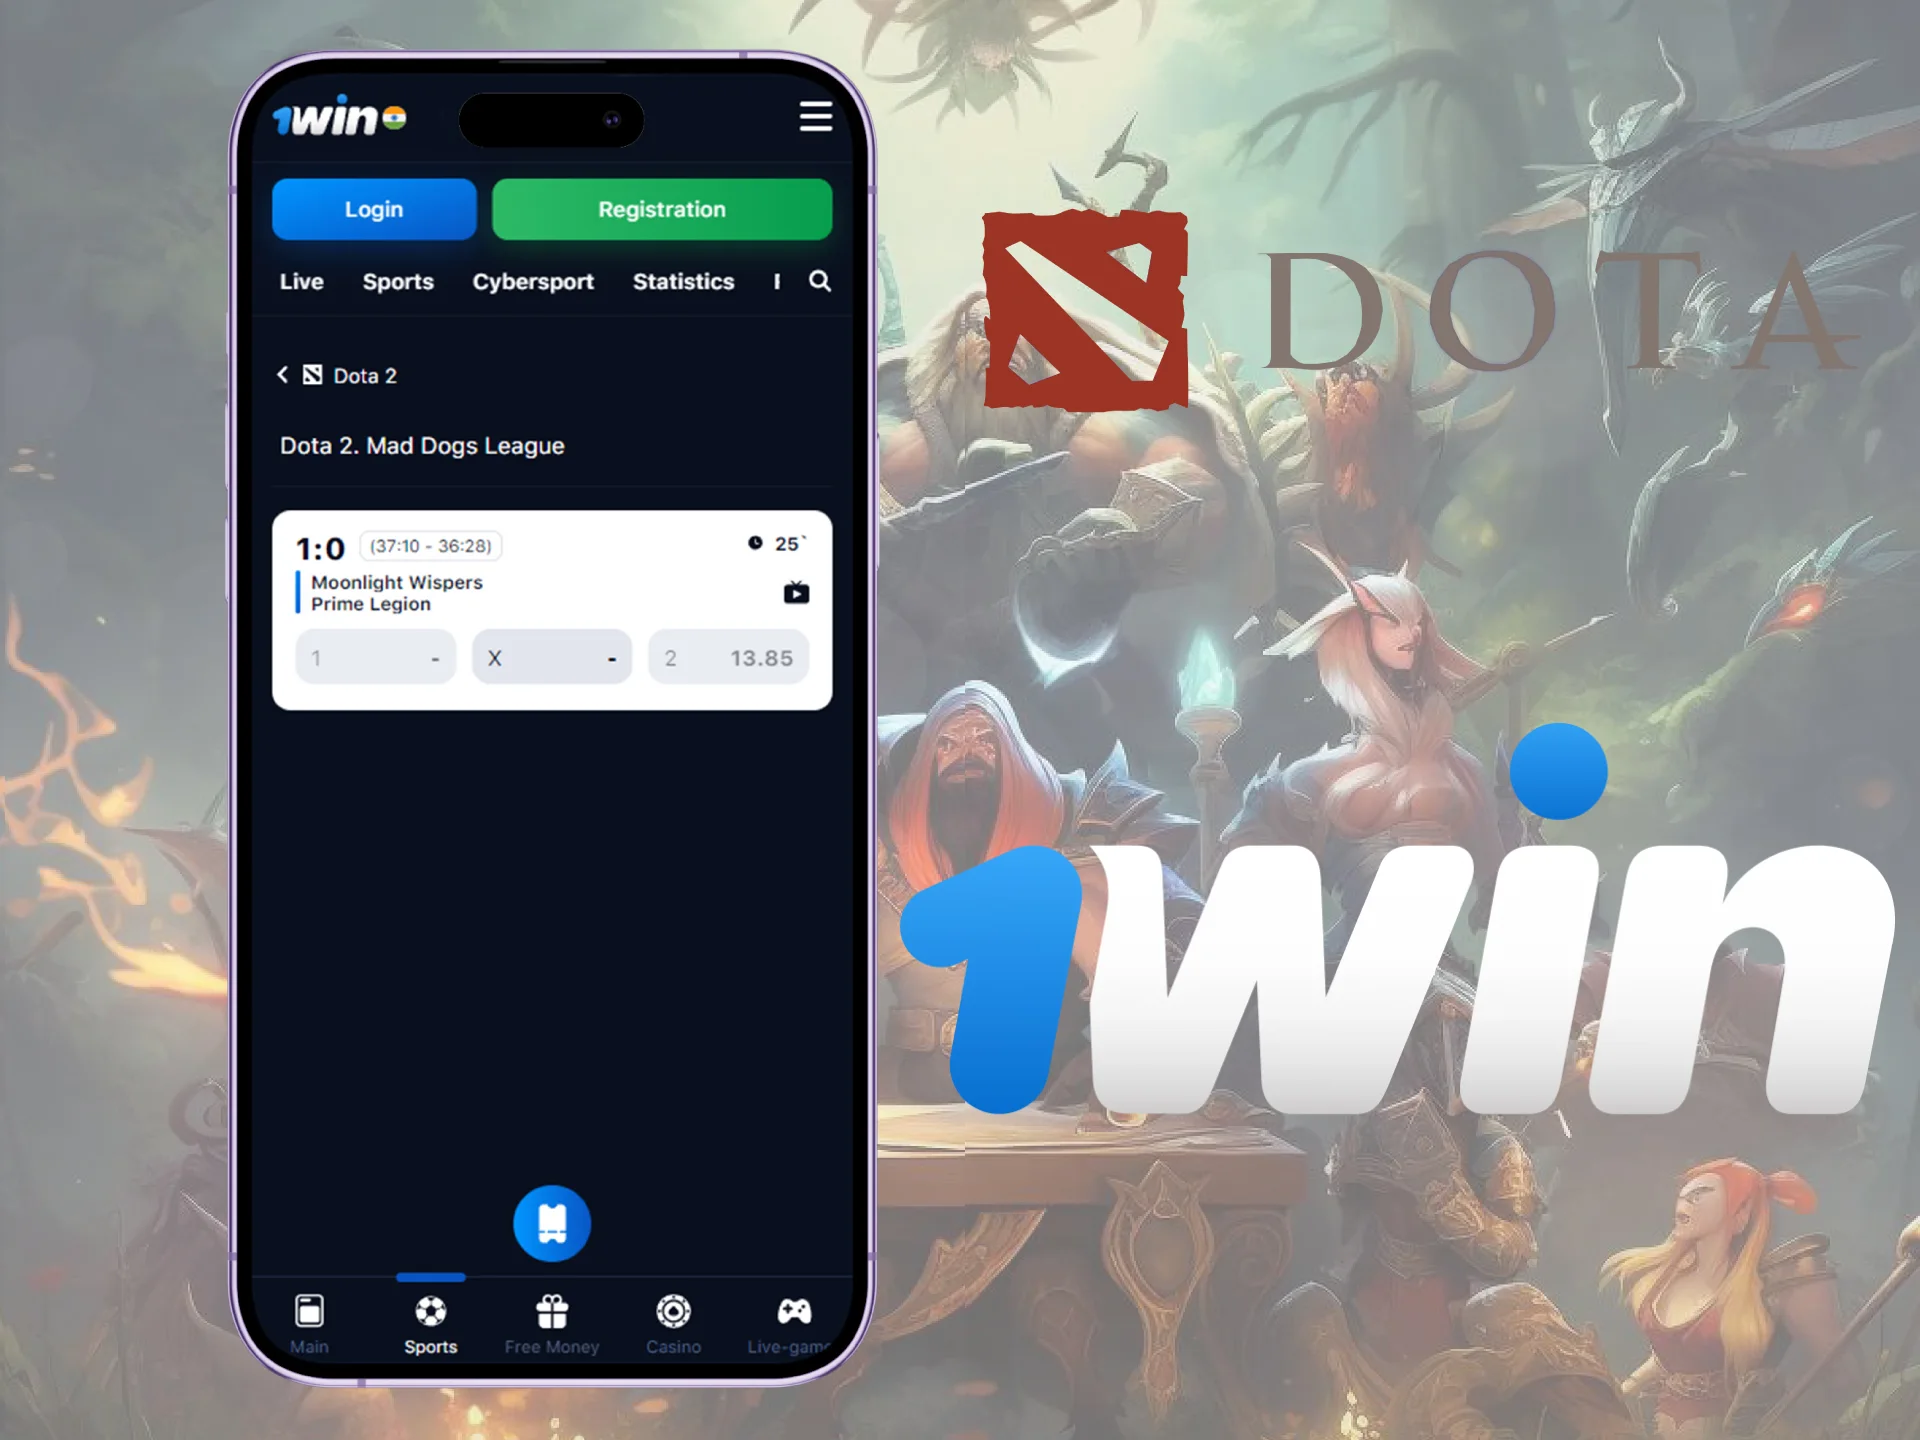 The 1Win app is perfect for online betting on Dota 2.